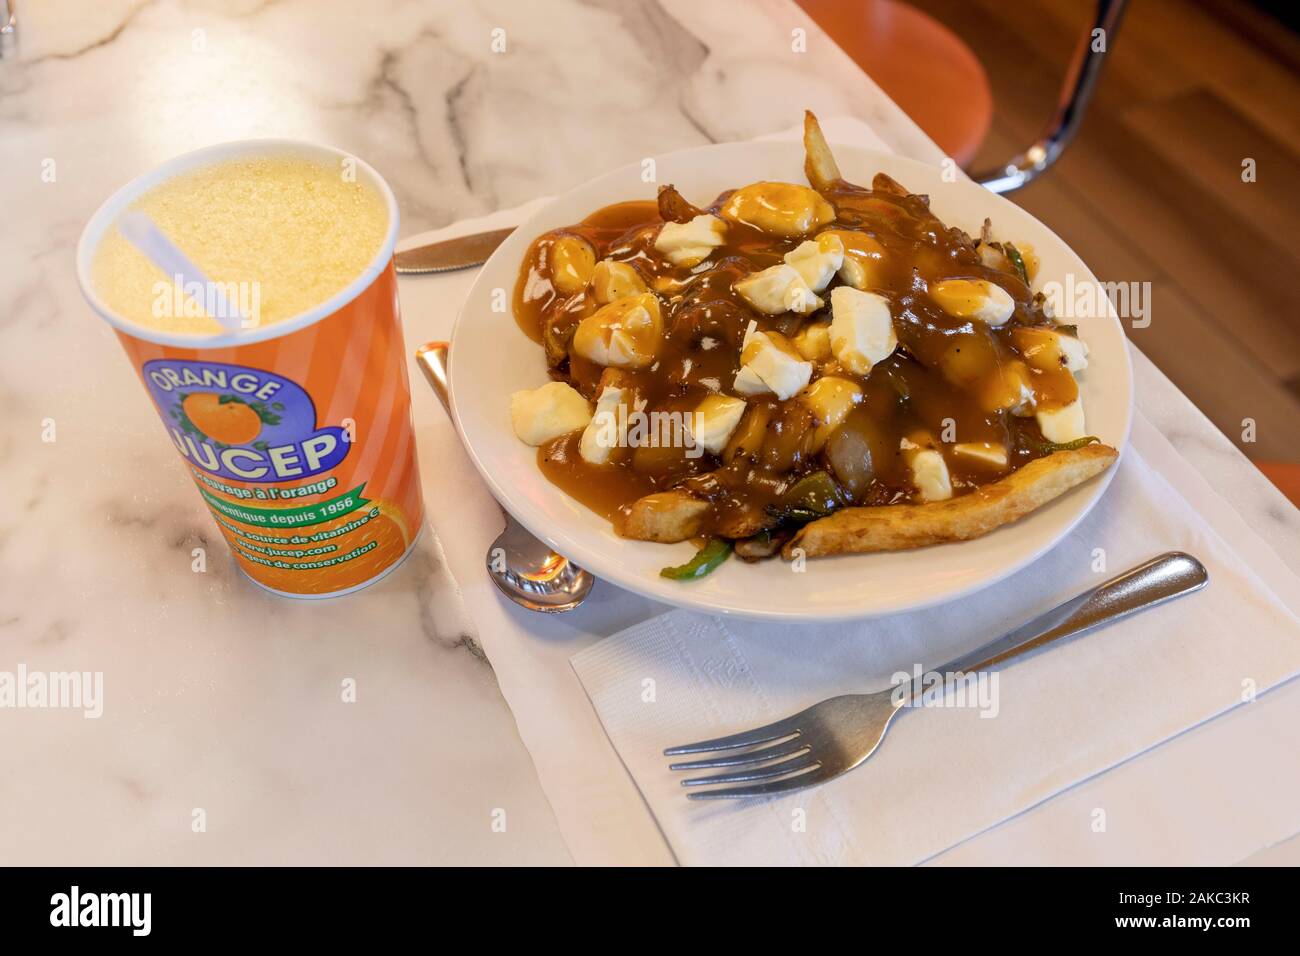 Canada, Province of Quebec, Centre-du-Québec region, in the footsteps of the invention of poutine, Drummondville, Le Roy Jucep restaurant, a poutine and and a Jucep Orange drink Stock Photo